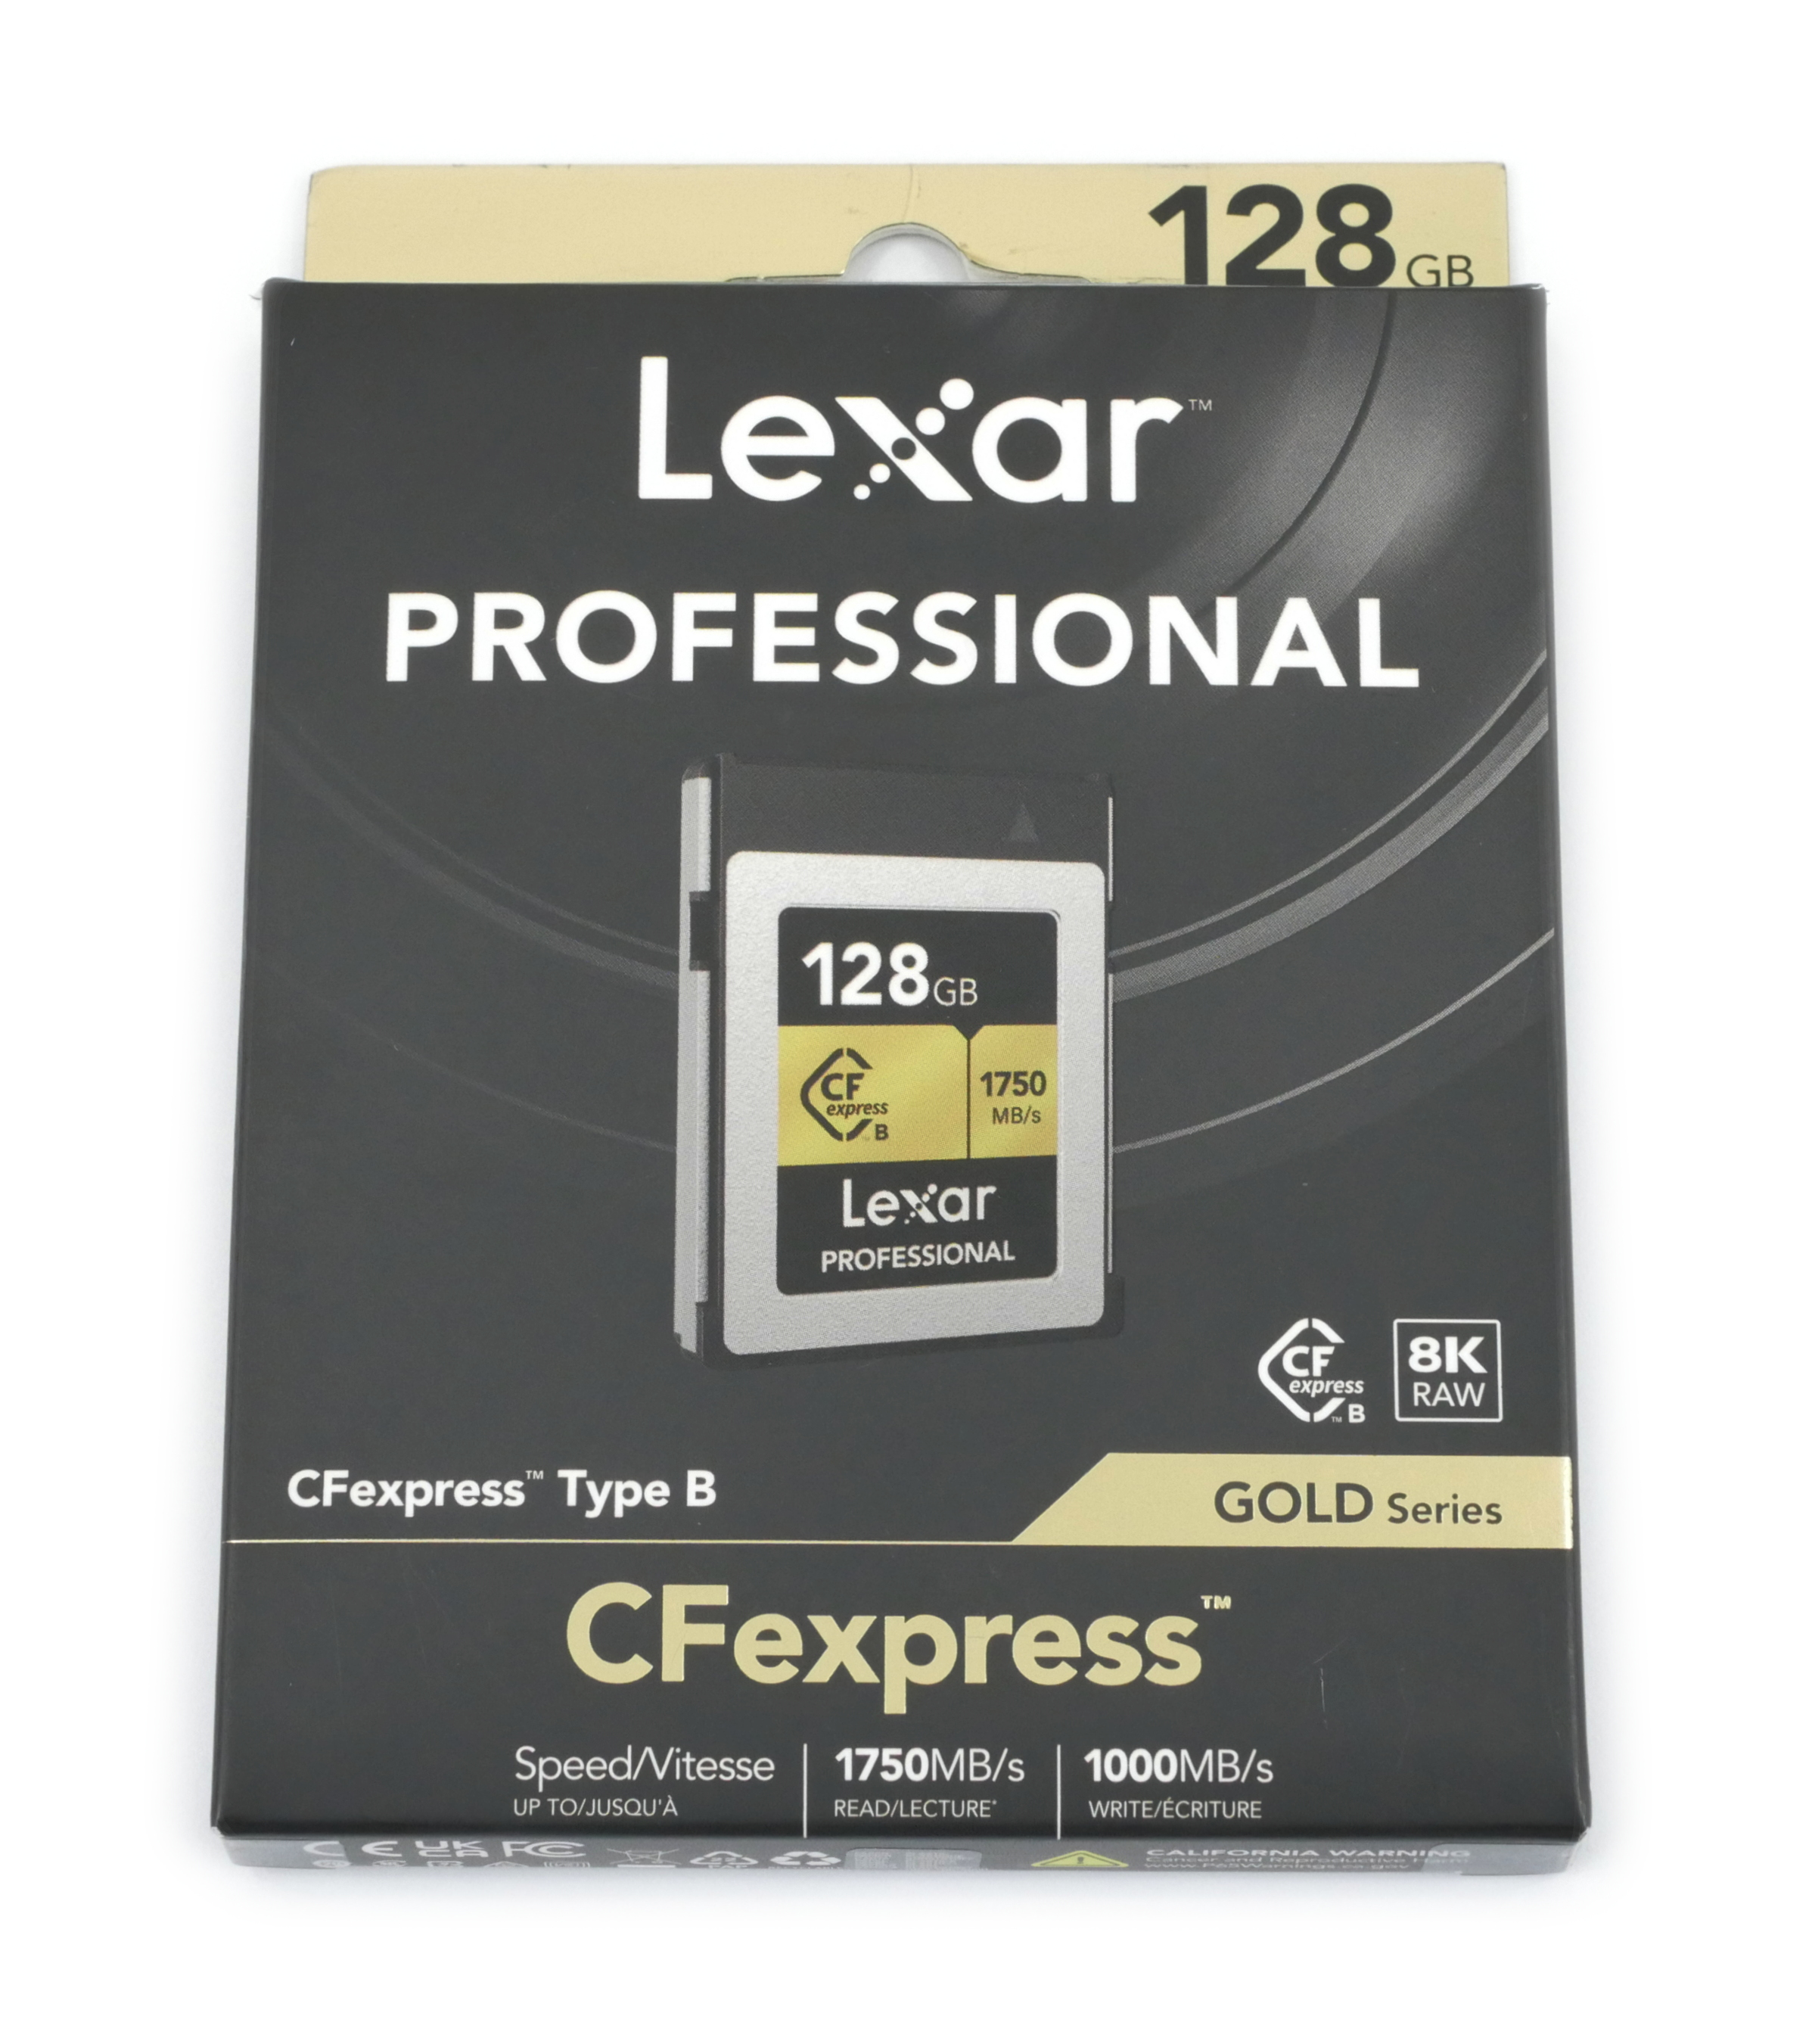 Lexar 128GB Professional CFexpress Type B Card GOLD Series LCFX10-128CRBNA - Click Image to Close